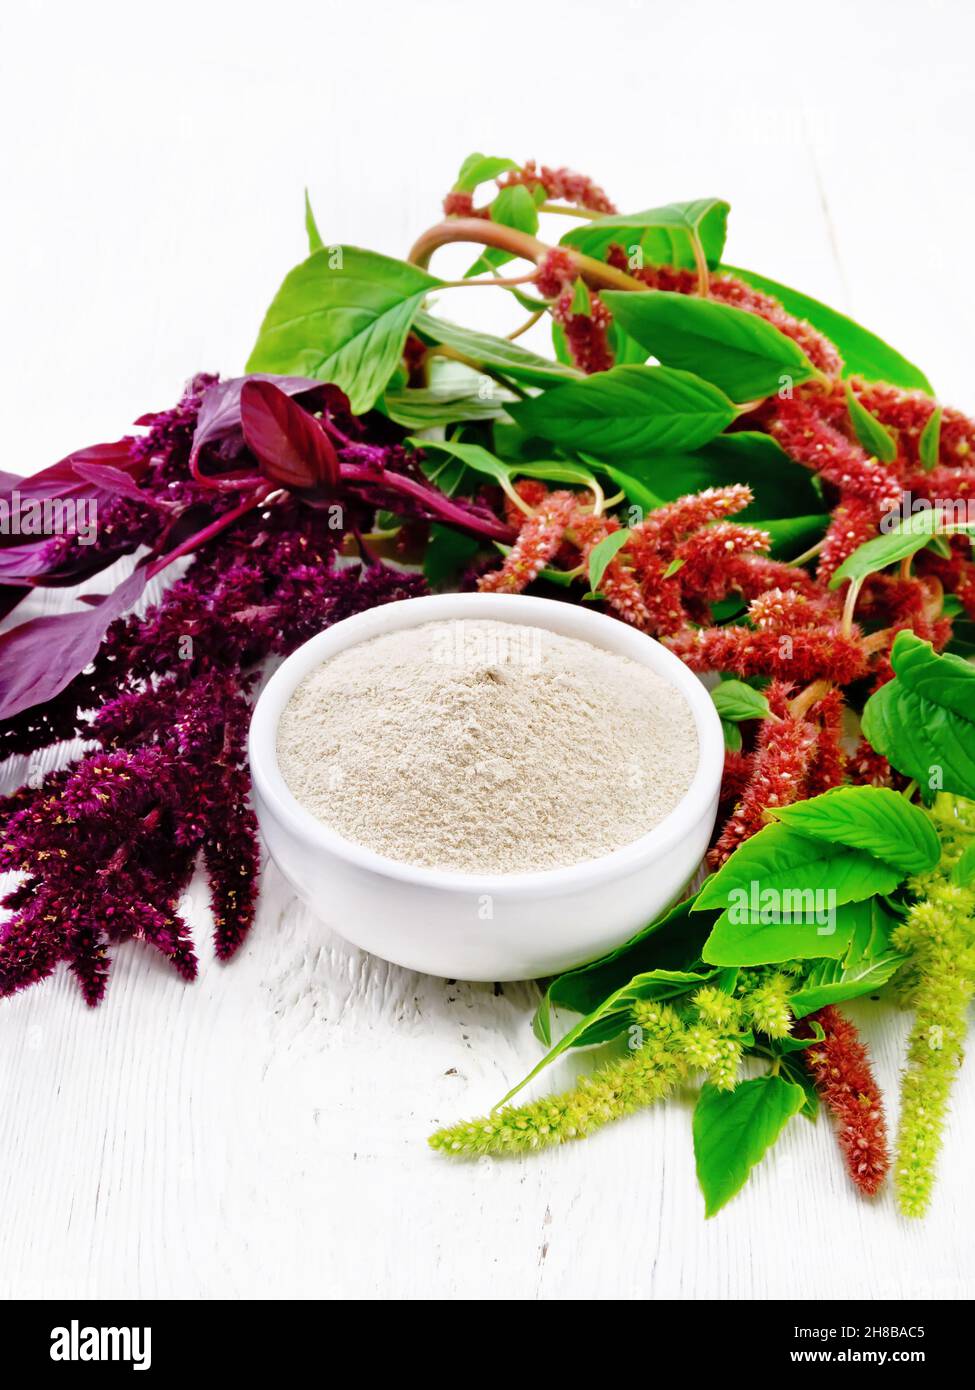 Amaranth flour in a bowl, brown, green and purple flowers of a plant on wooden board background Stock Photo